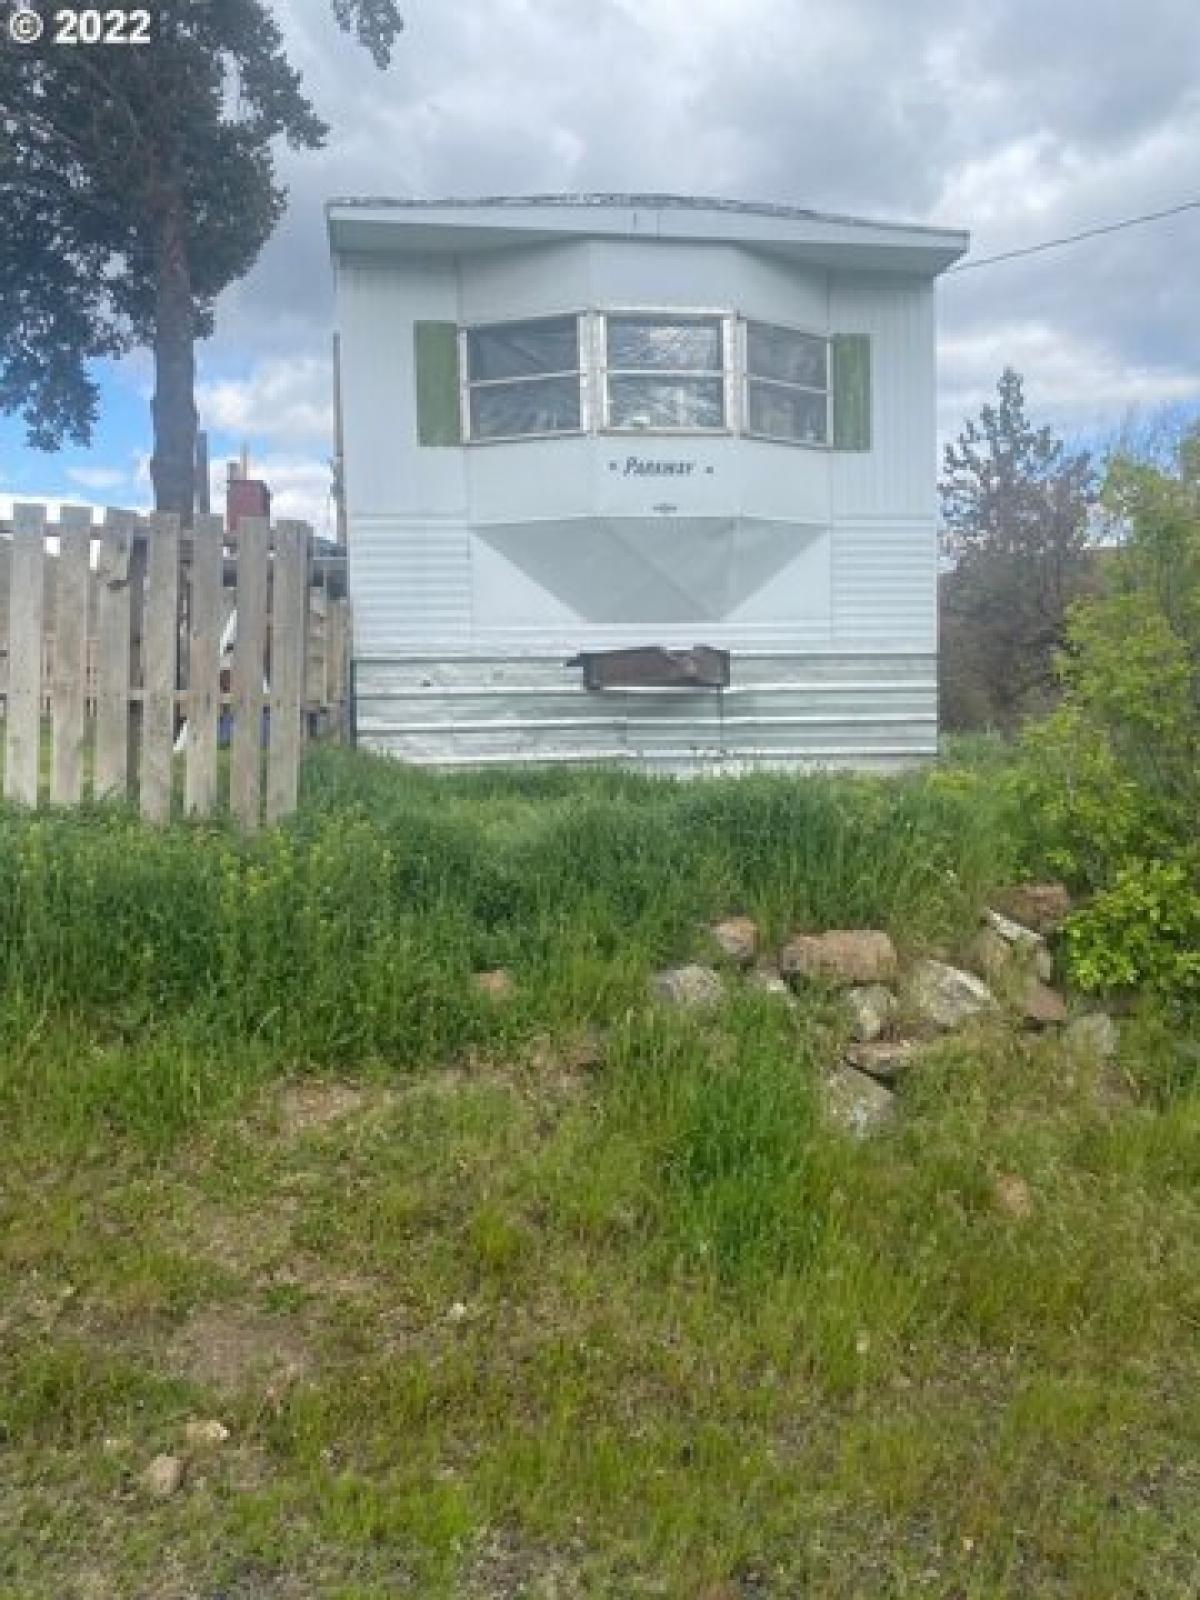 Picture of Home For Sale in Heppner, Oregon, United States